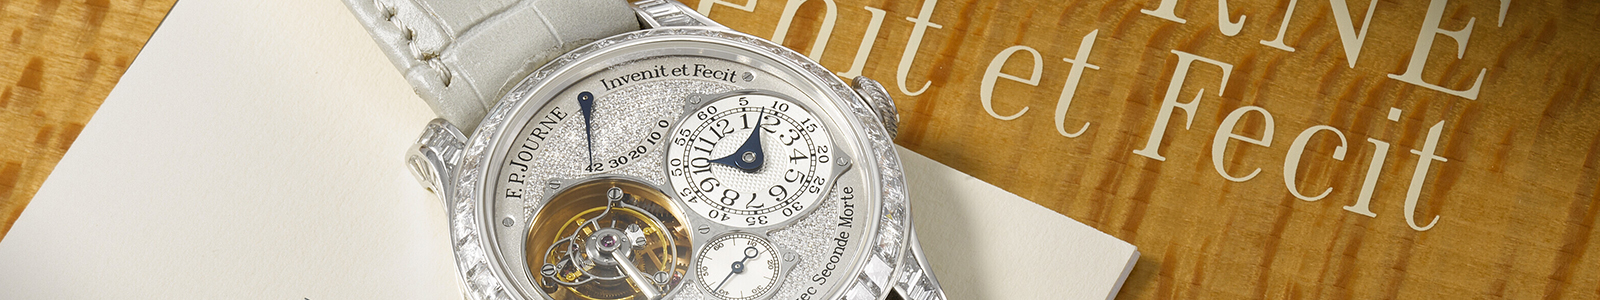 Passion for Time - An Important Private Collection of Watches and Timepieces